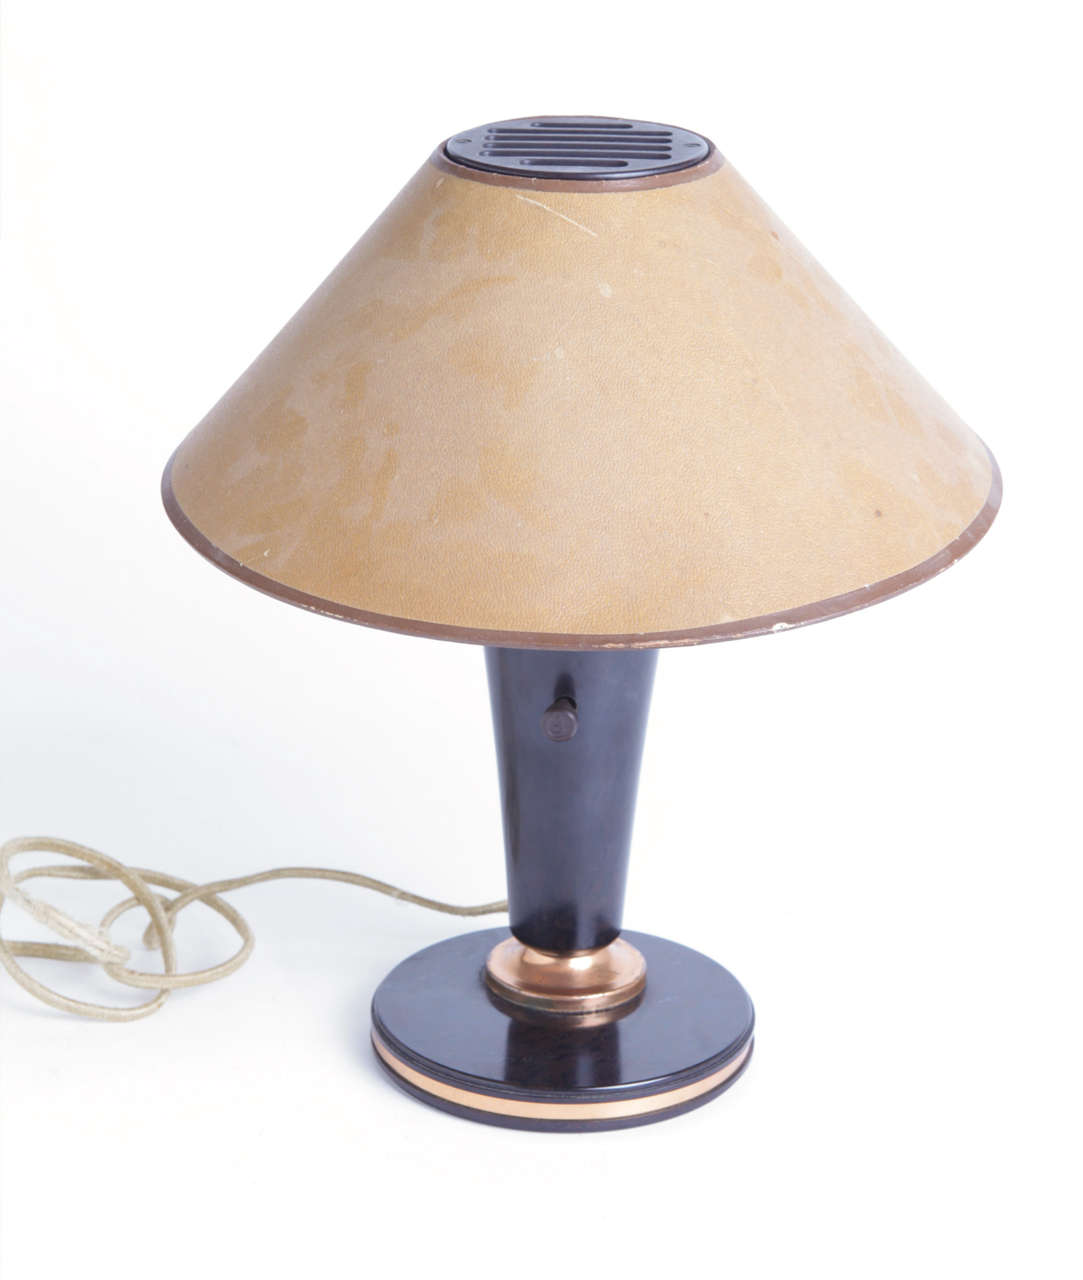 Machine Age Art Deco bakelite polaroid study lamp Del Guidice / Walter Dorwin Teague SALE
Price reduced from $1600

Version two of the three original Iconic Polaroid desk lamps.
Model 100 study lamp, designed by Frank J. Del Guidice for Teague